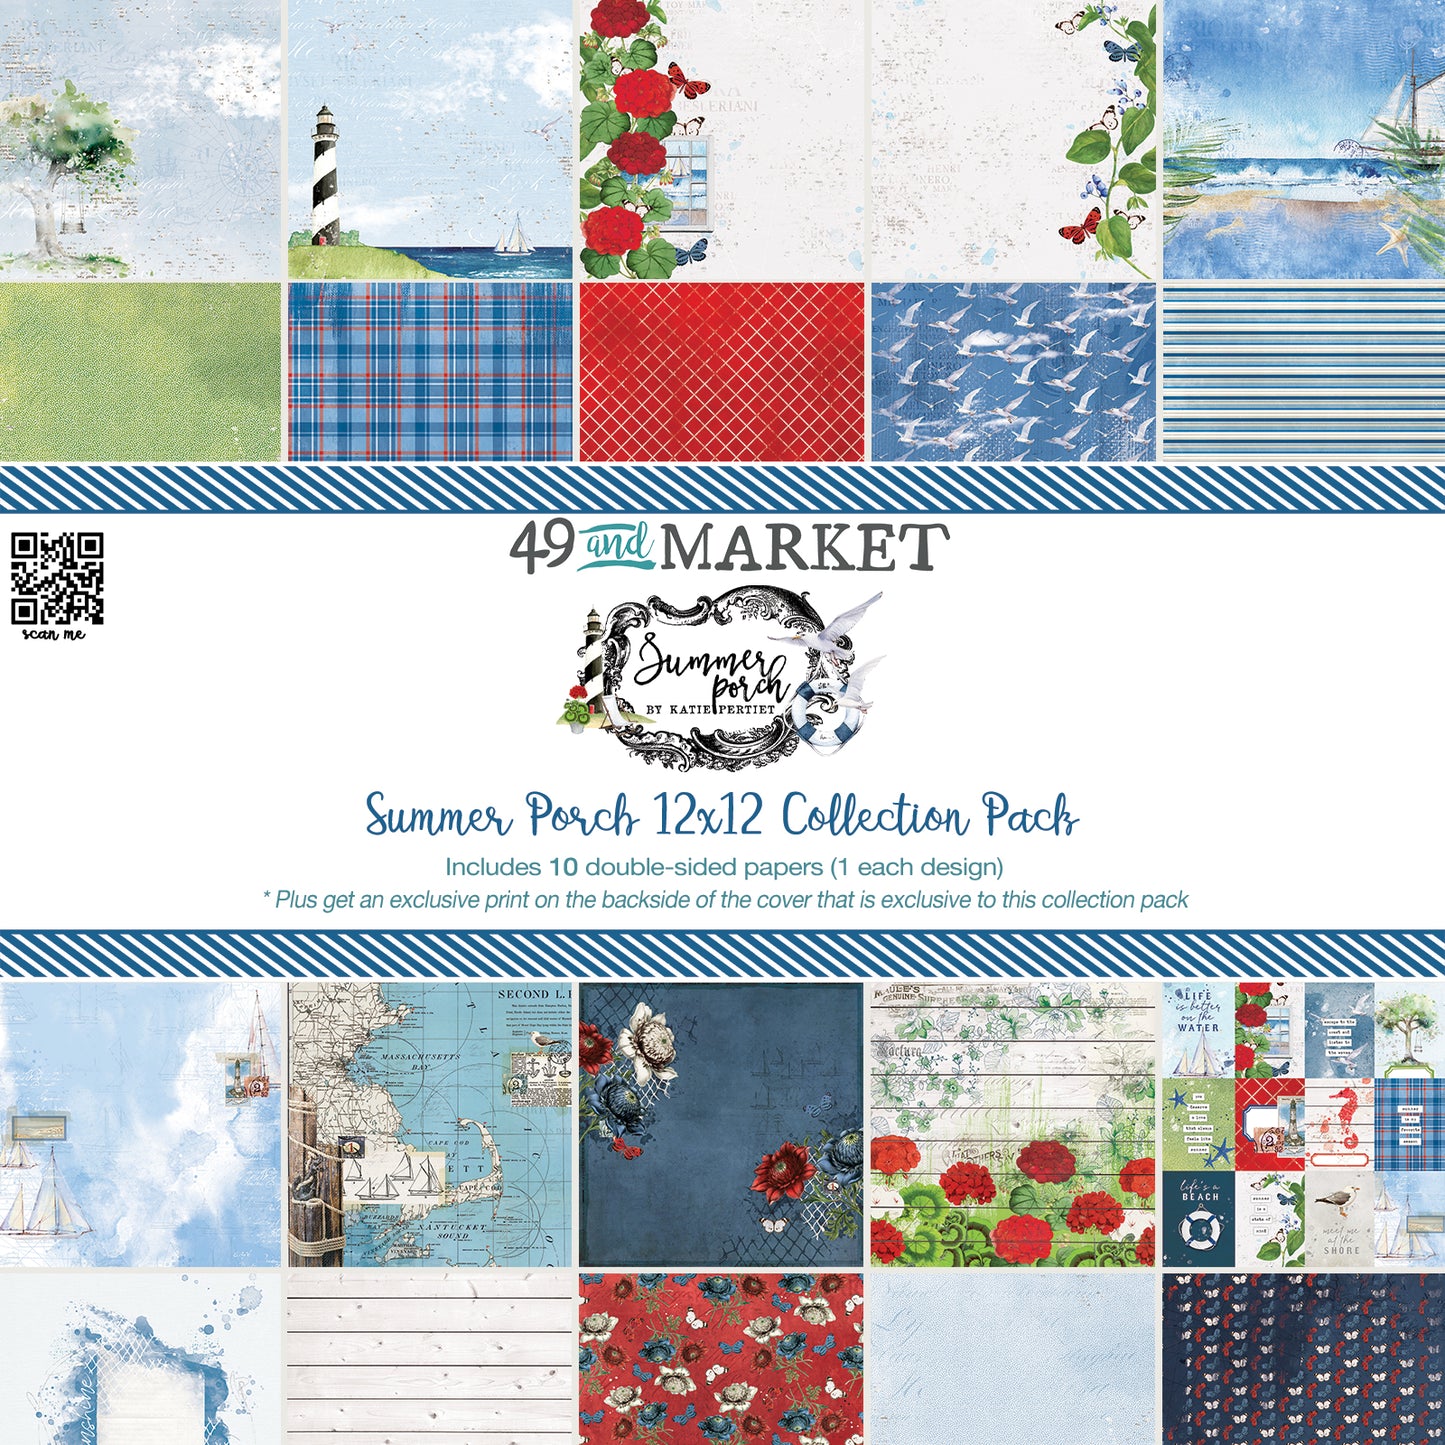 BUY IT ALL: 49 & Market Summer Porch Collection